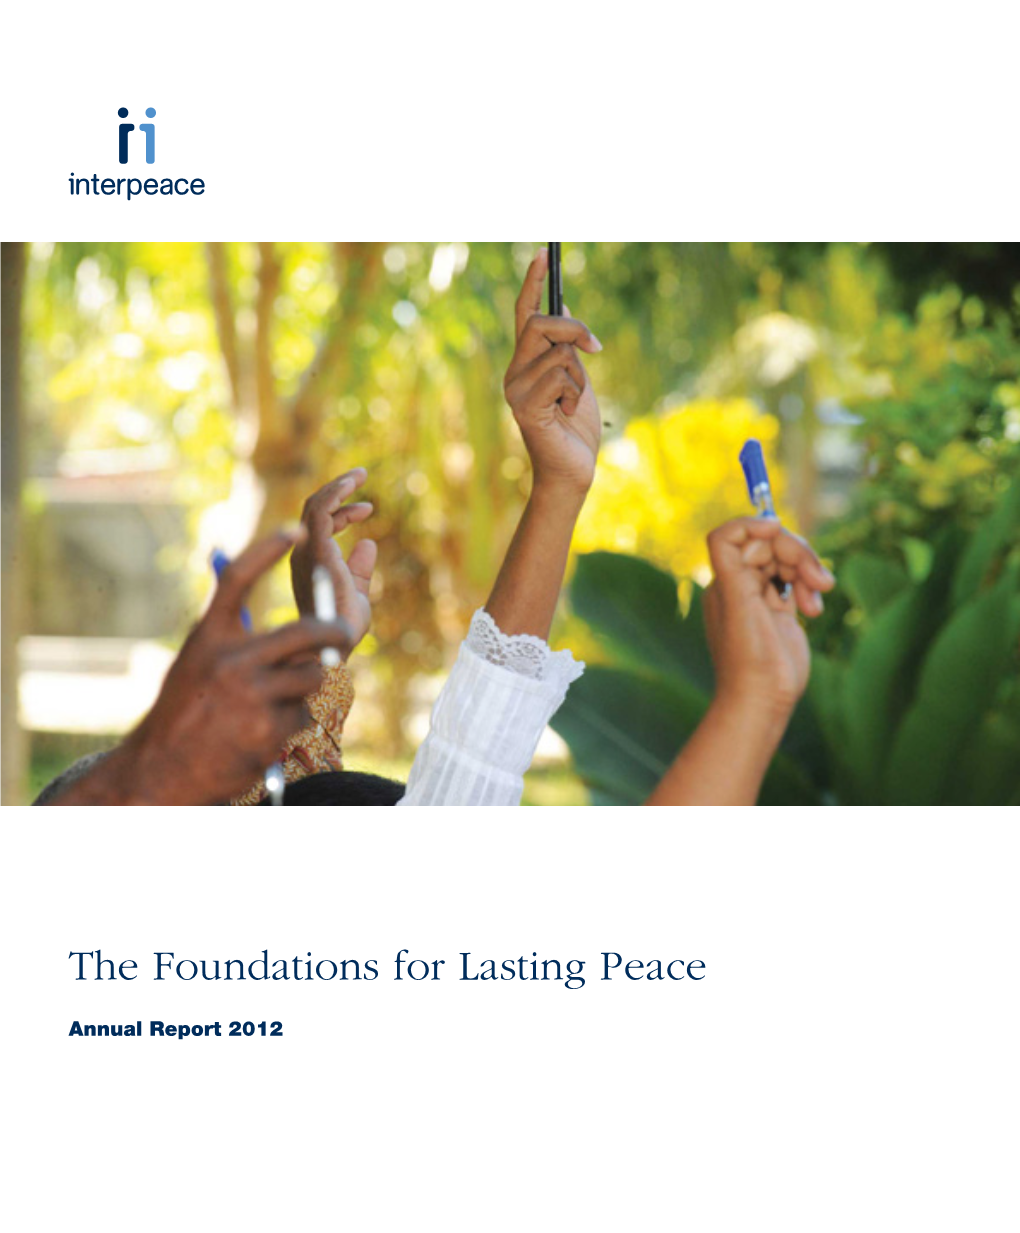 The Foundations for Lasting Peace